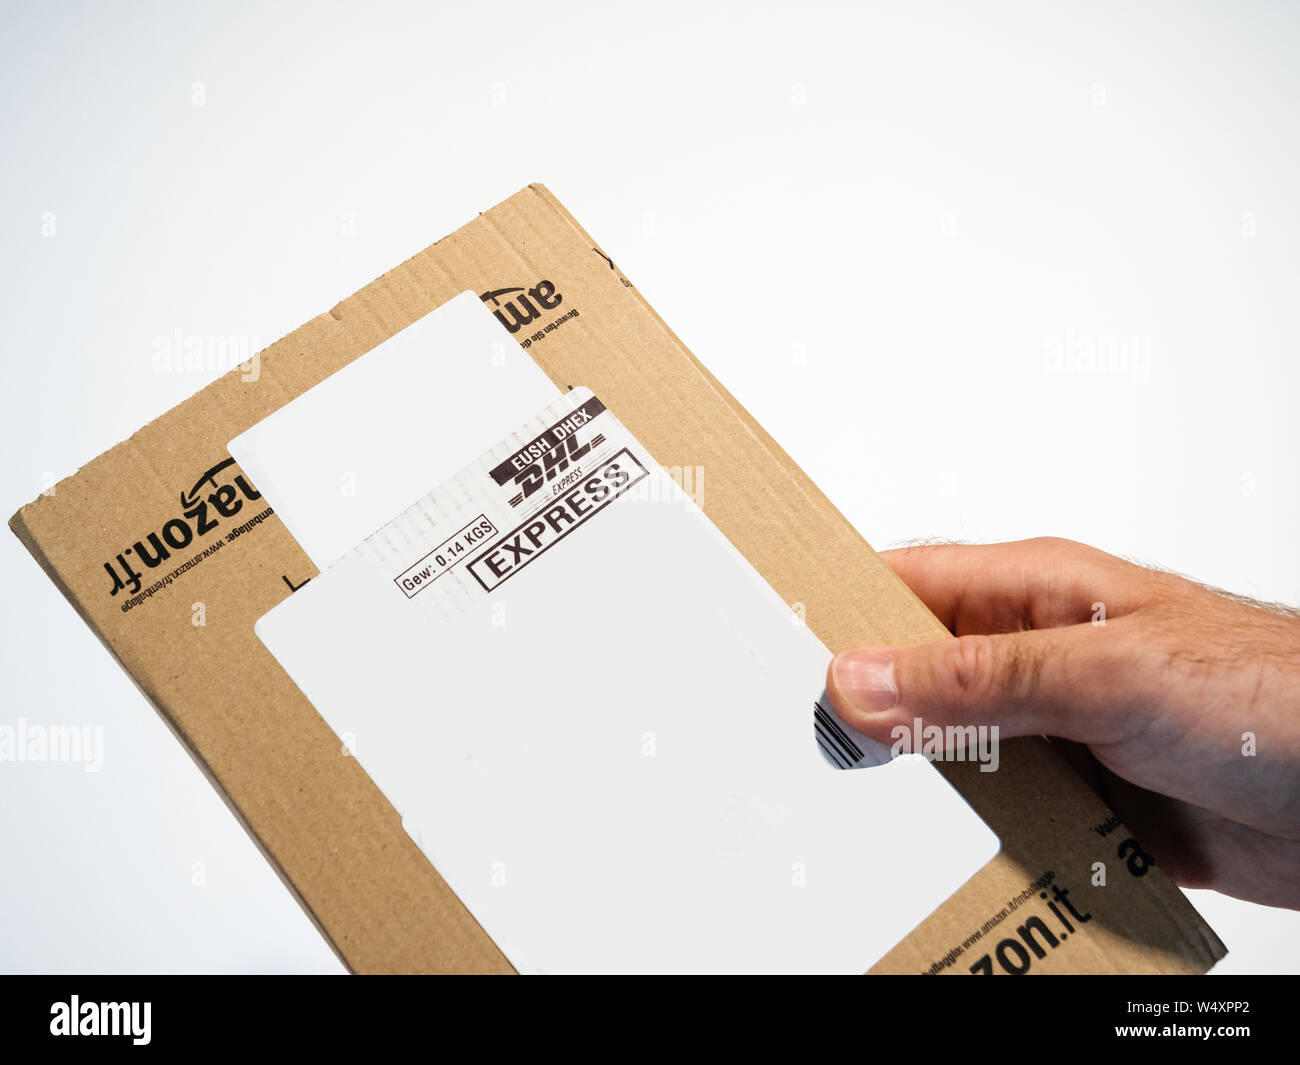 Paris, France - Jun 17, 2017: Man hand holding against white bakground  Amazon parcel cardboard parcel with DHL express delivery sticker Stock  Photo - Alamy